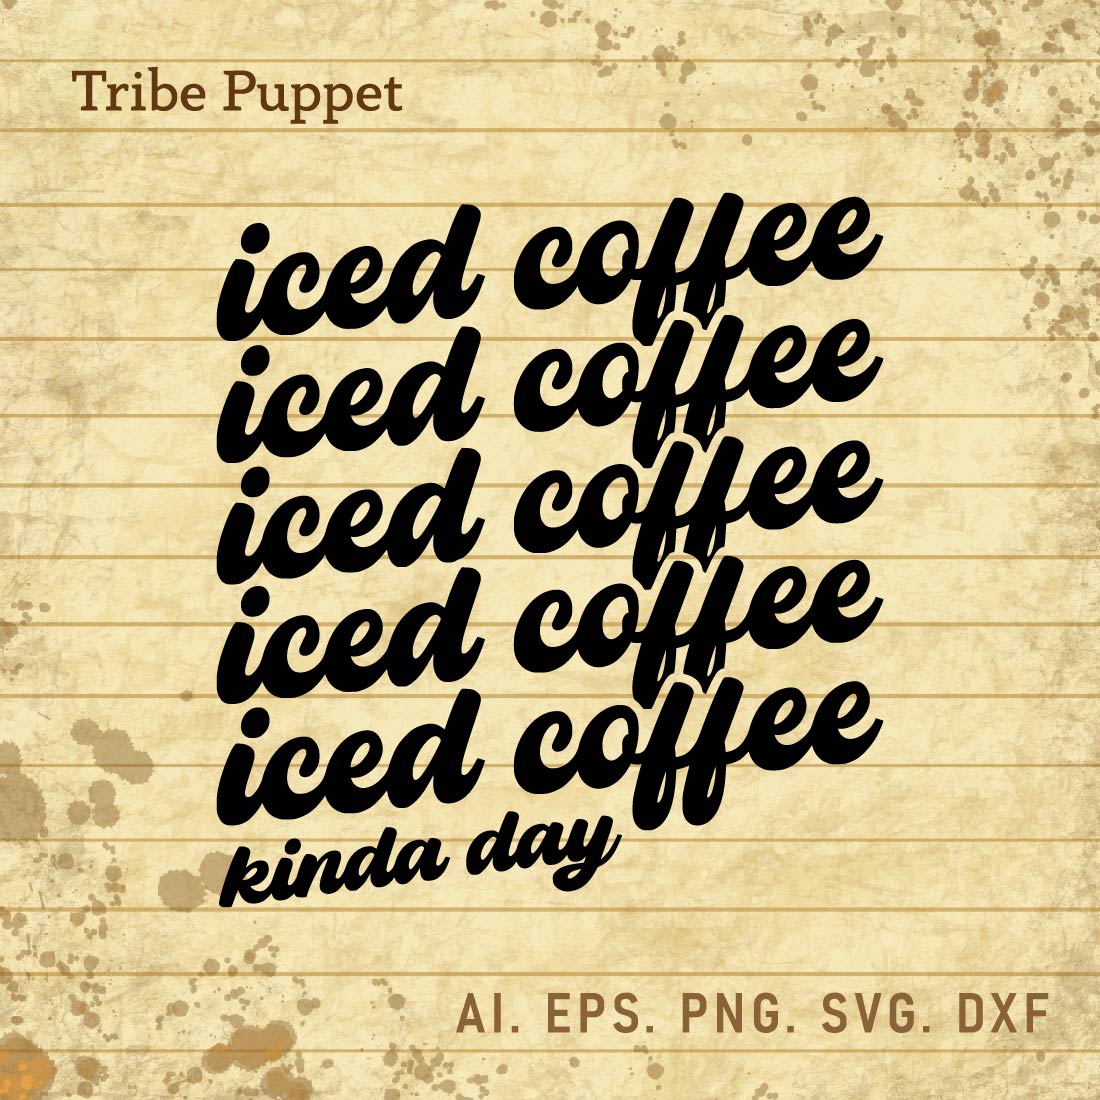 Coffee Quotes cover image.